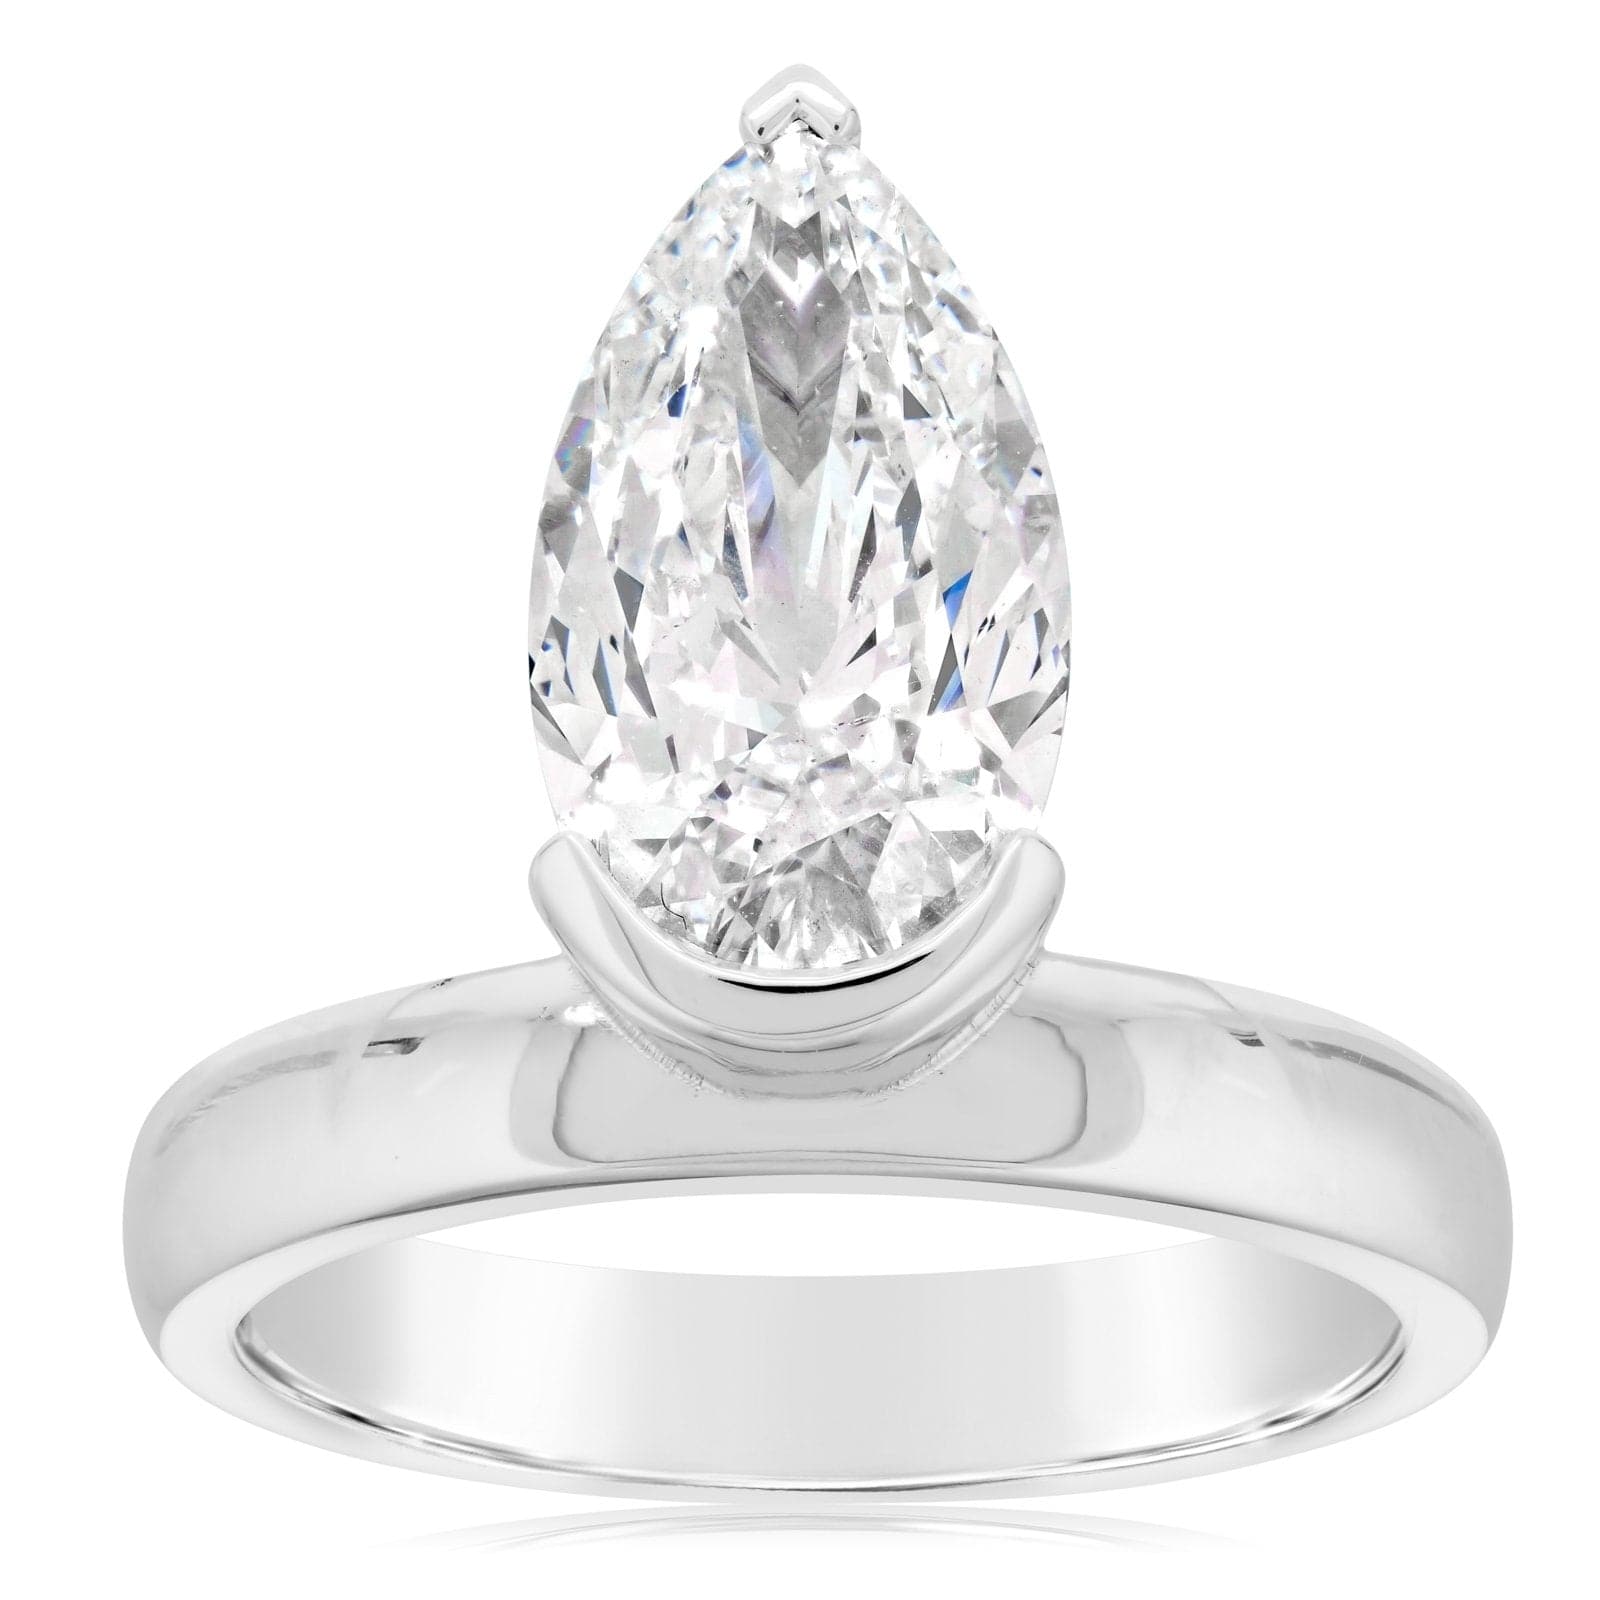 Pear Shape Petite Halo Micropavé Diamond Engagement Ring Setting (0.52ctw)  in 18k White Gold